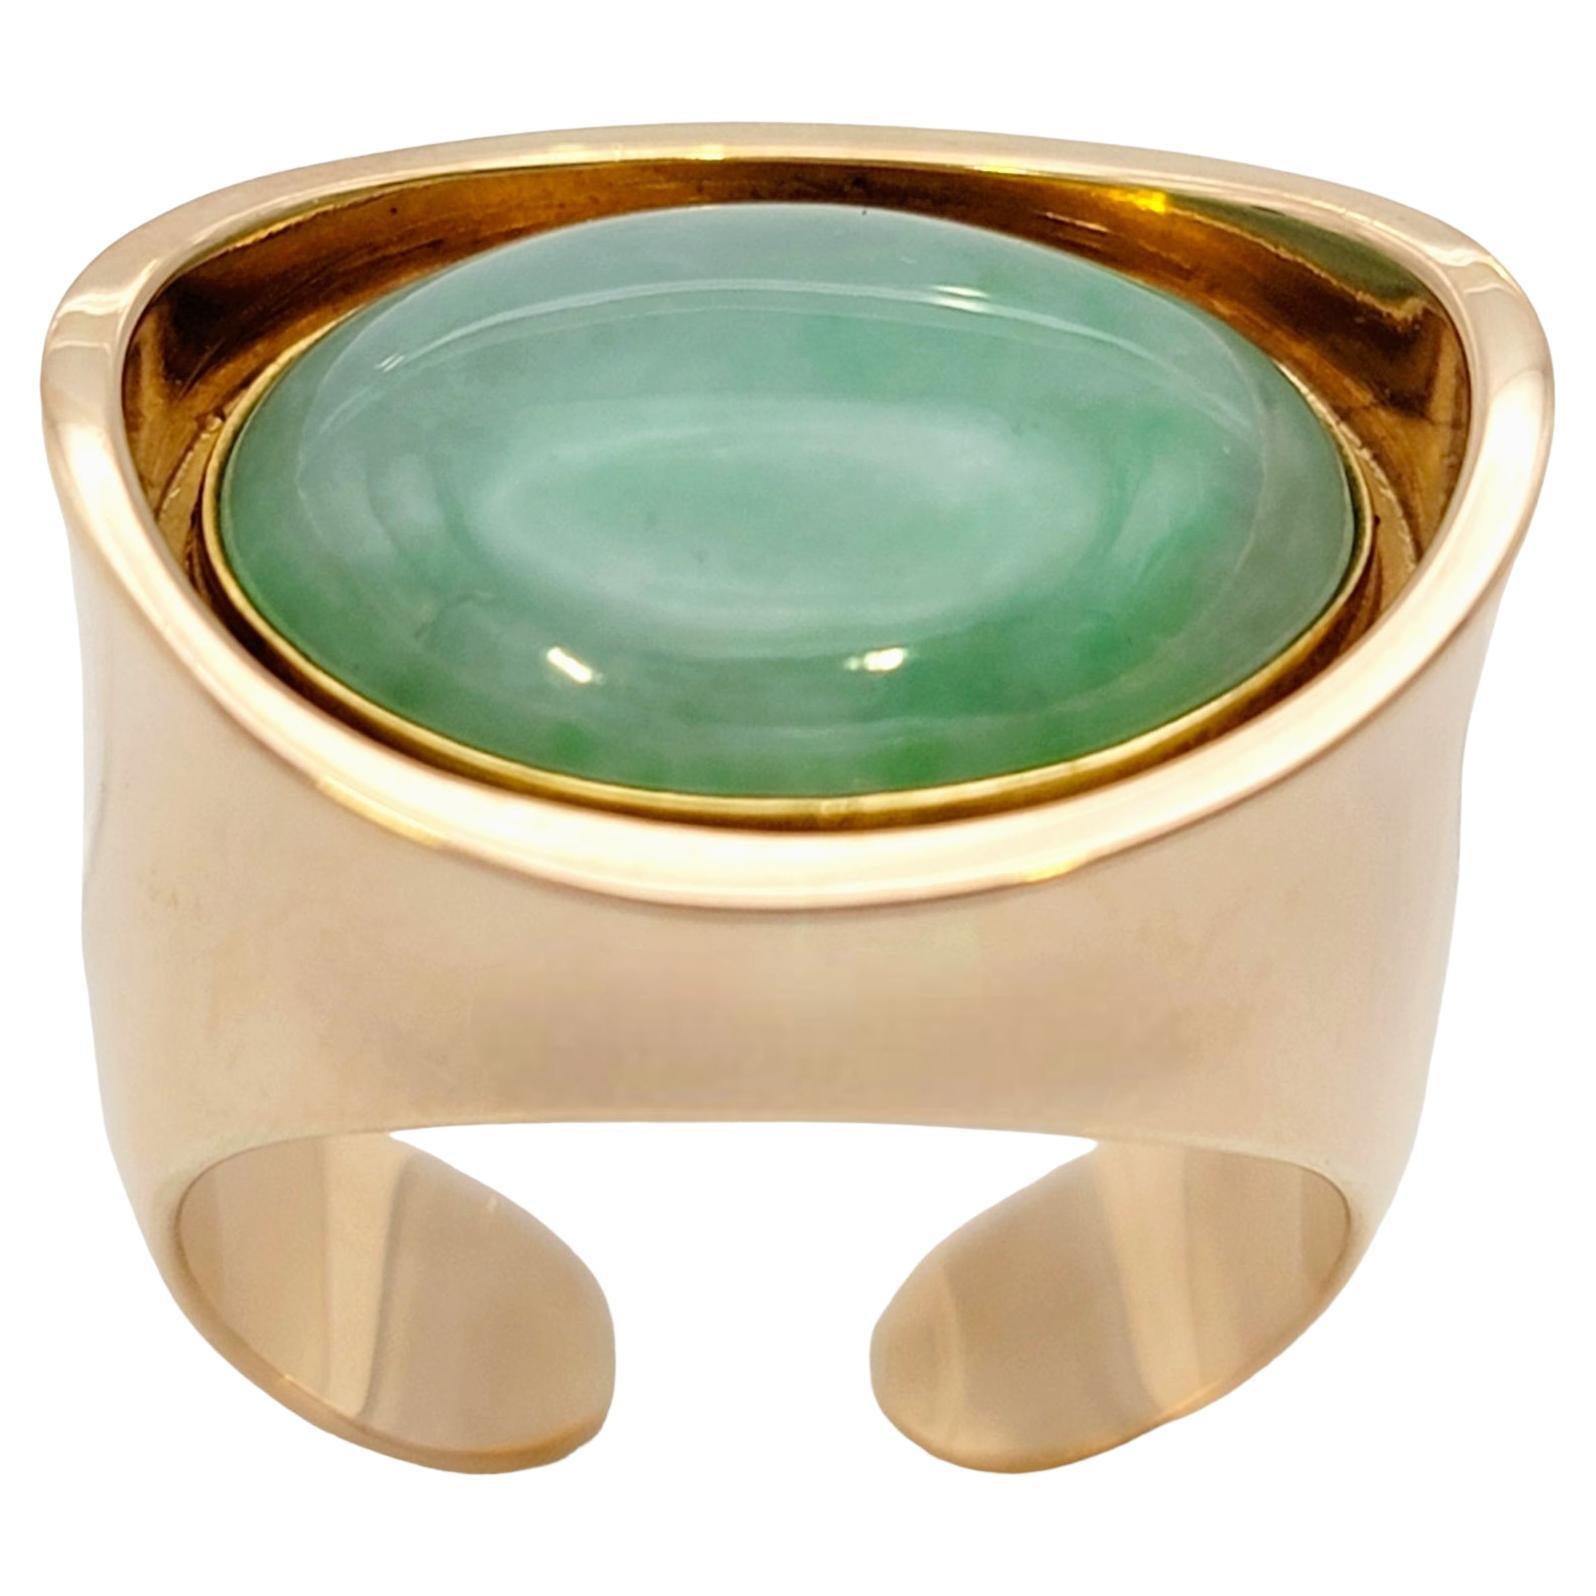 Ring size: 7

Introducing a truly stunning vintage jade cocktail ring, a masterpiece of fine craftsmanship and undeniable elegance. This alluring ring, crafted by esteemed designer Bent Knudsen, showcases a captivating oval cabochon jade gemstone in